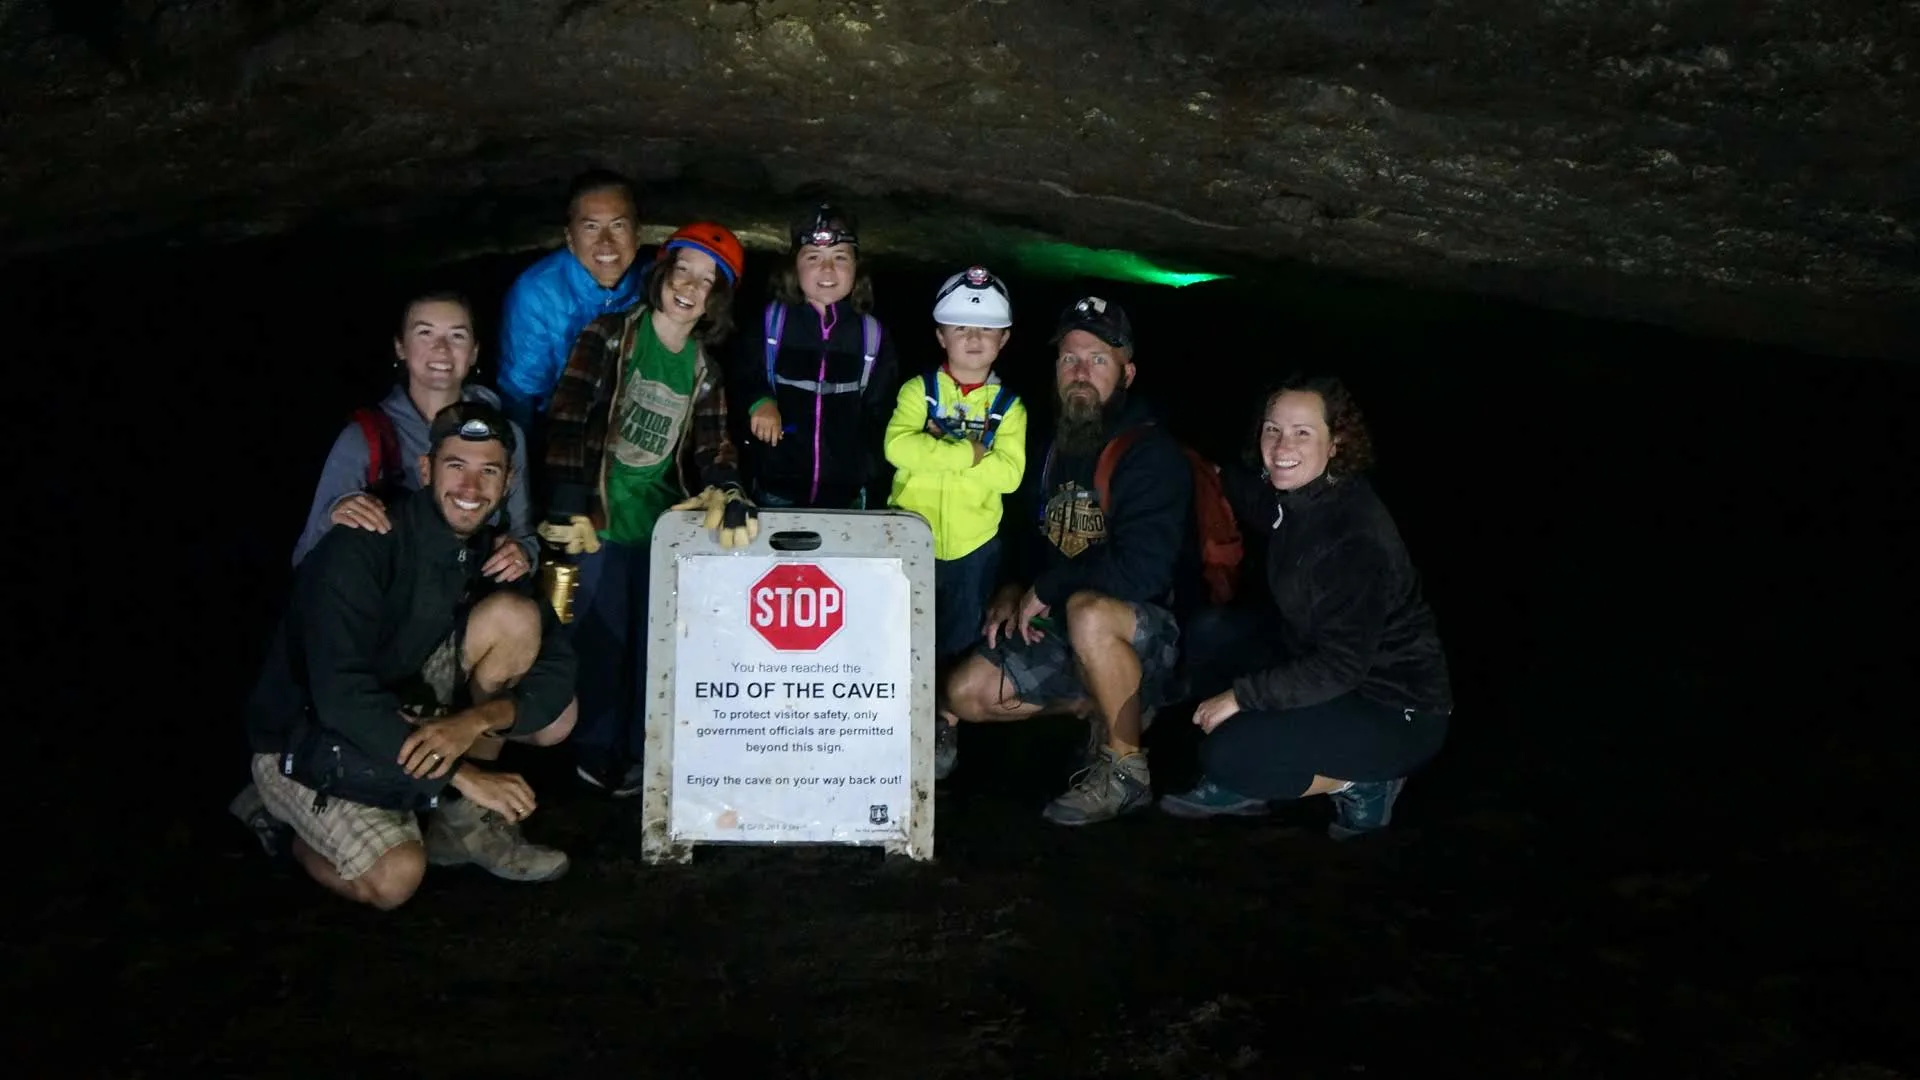 Mortons on the Move spelunking with a group